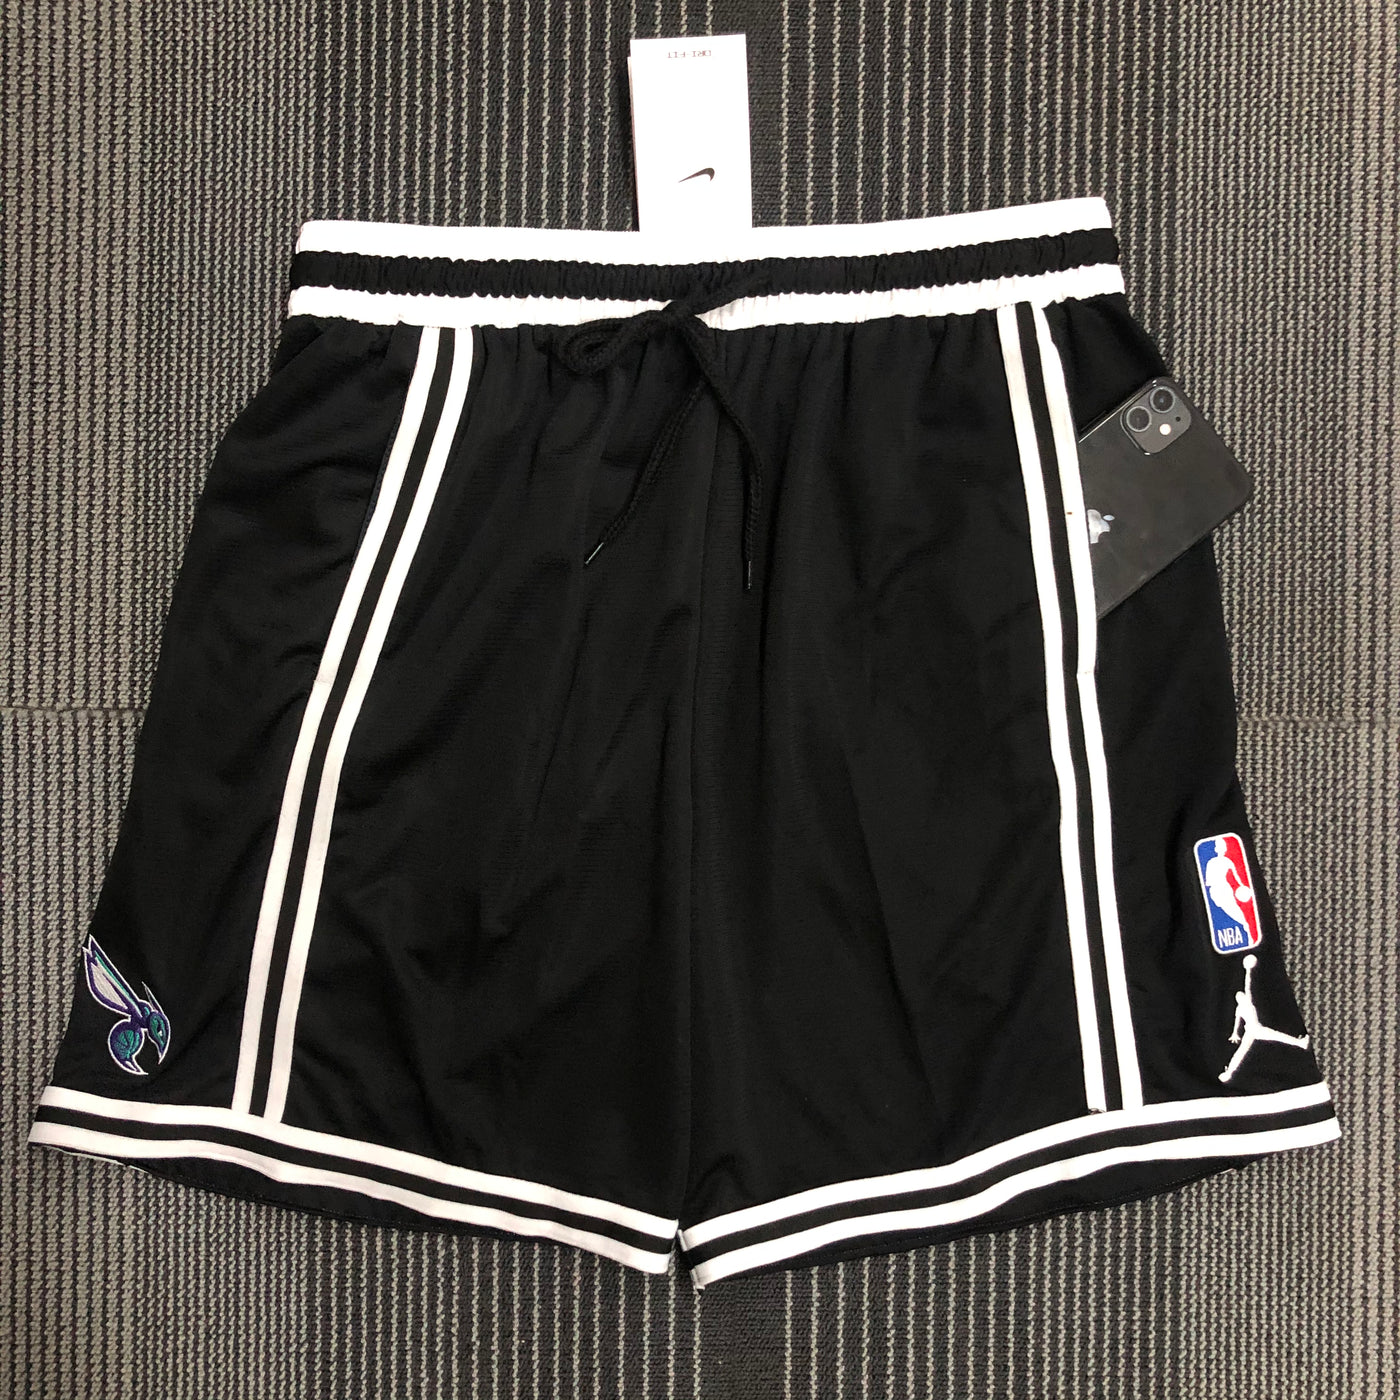 SHORTS Charlotte Hornets loose fit